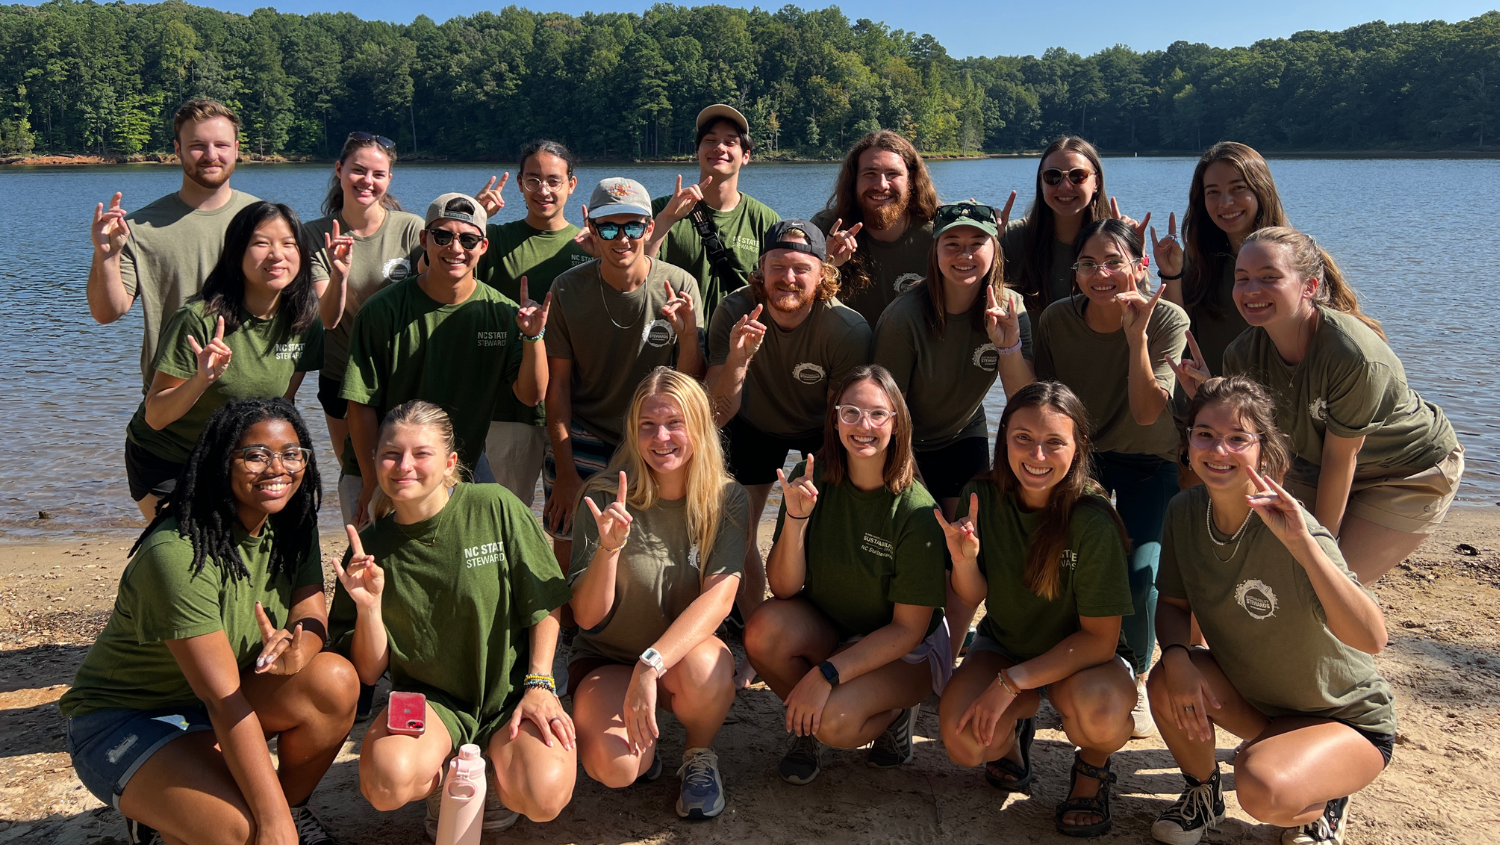 Group photo of Sustainability Stewards standing in front of lake wearing green t-shirts